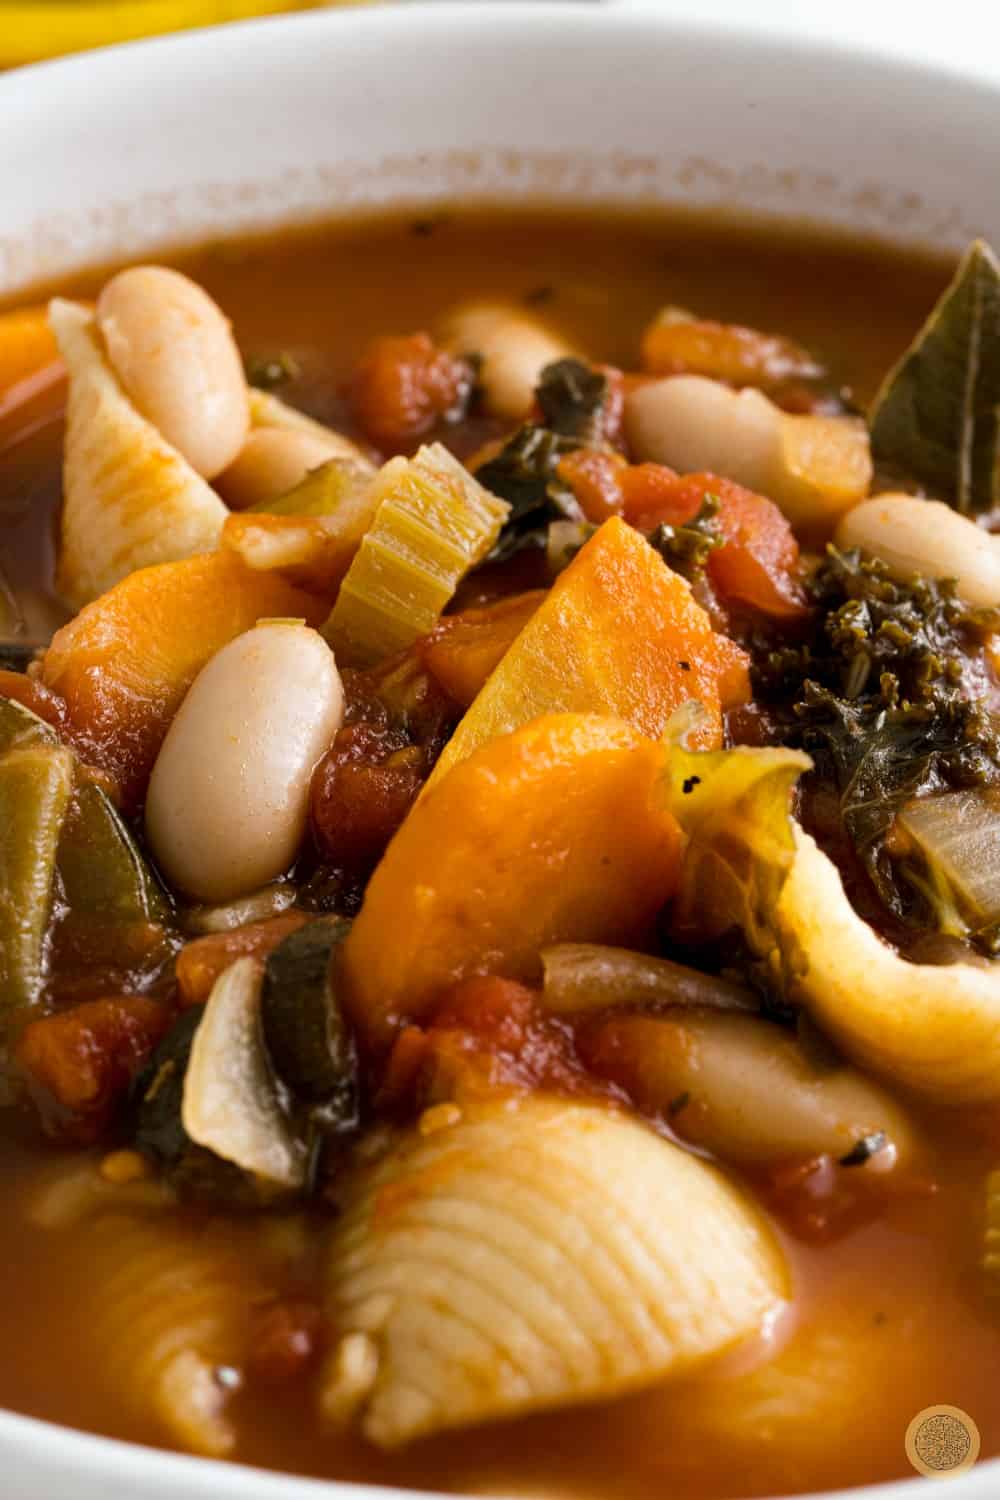 Can I Freeze Classic Minestrone Soup?